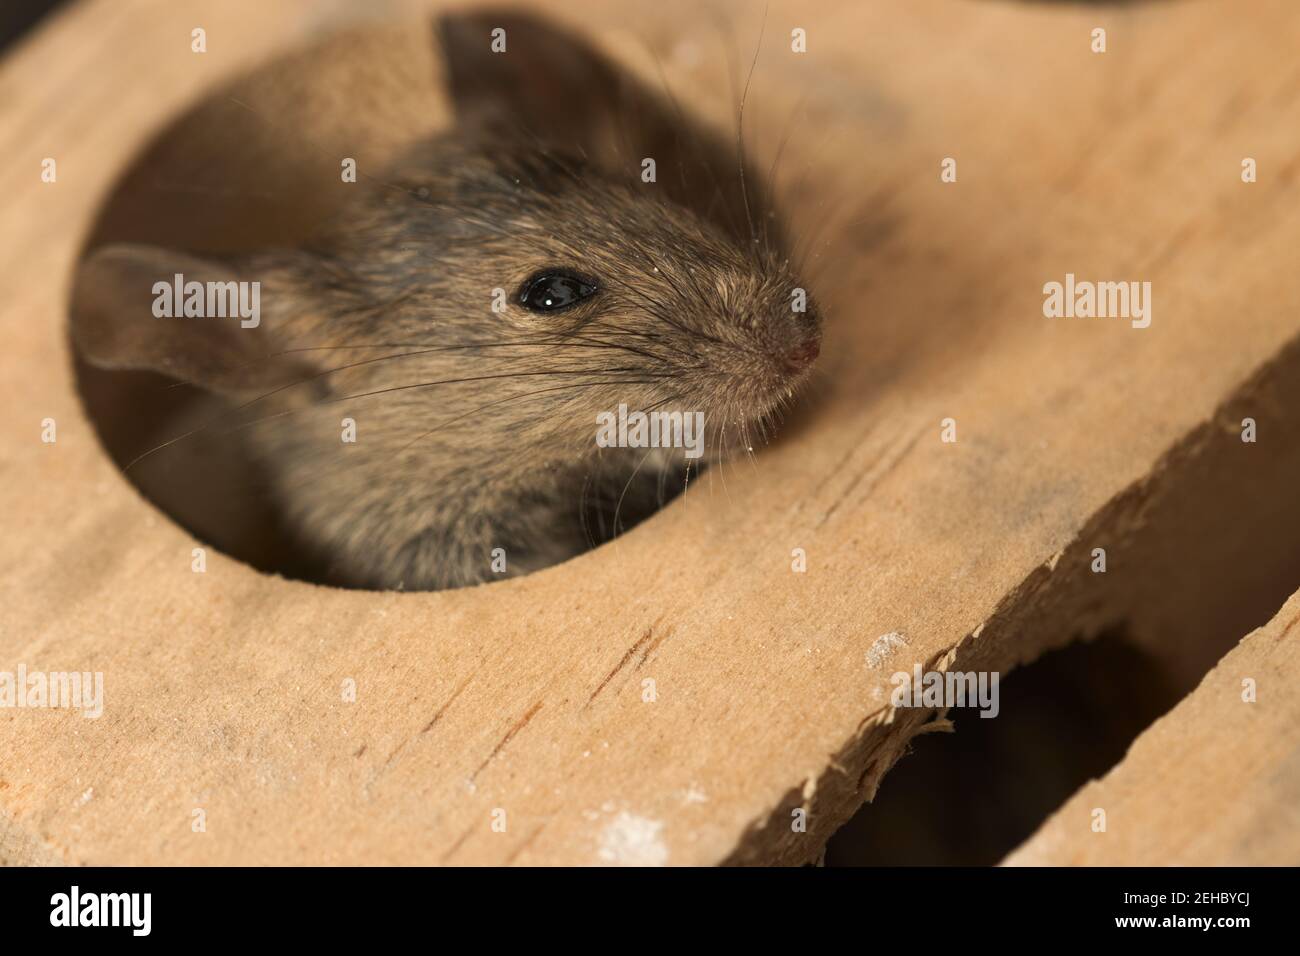 Closeup of the head of a common mouse (Mus musculus) poking out of a hole in a trap Stock Photo